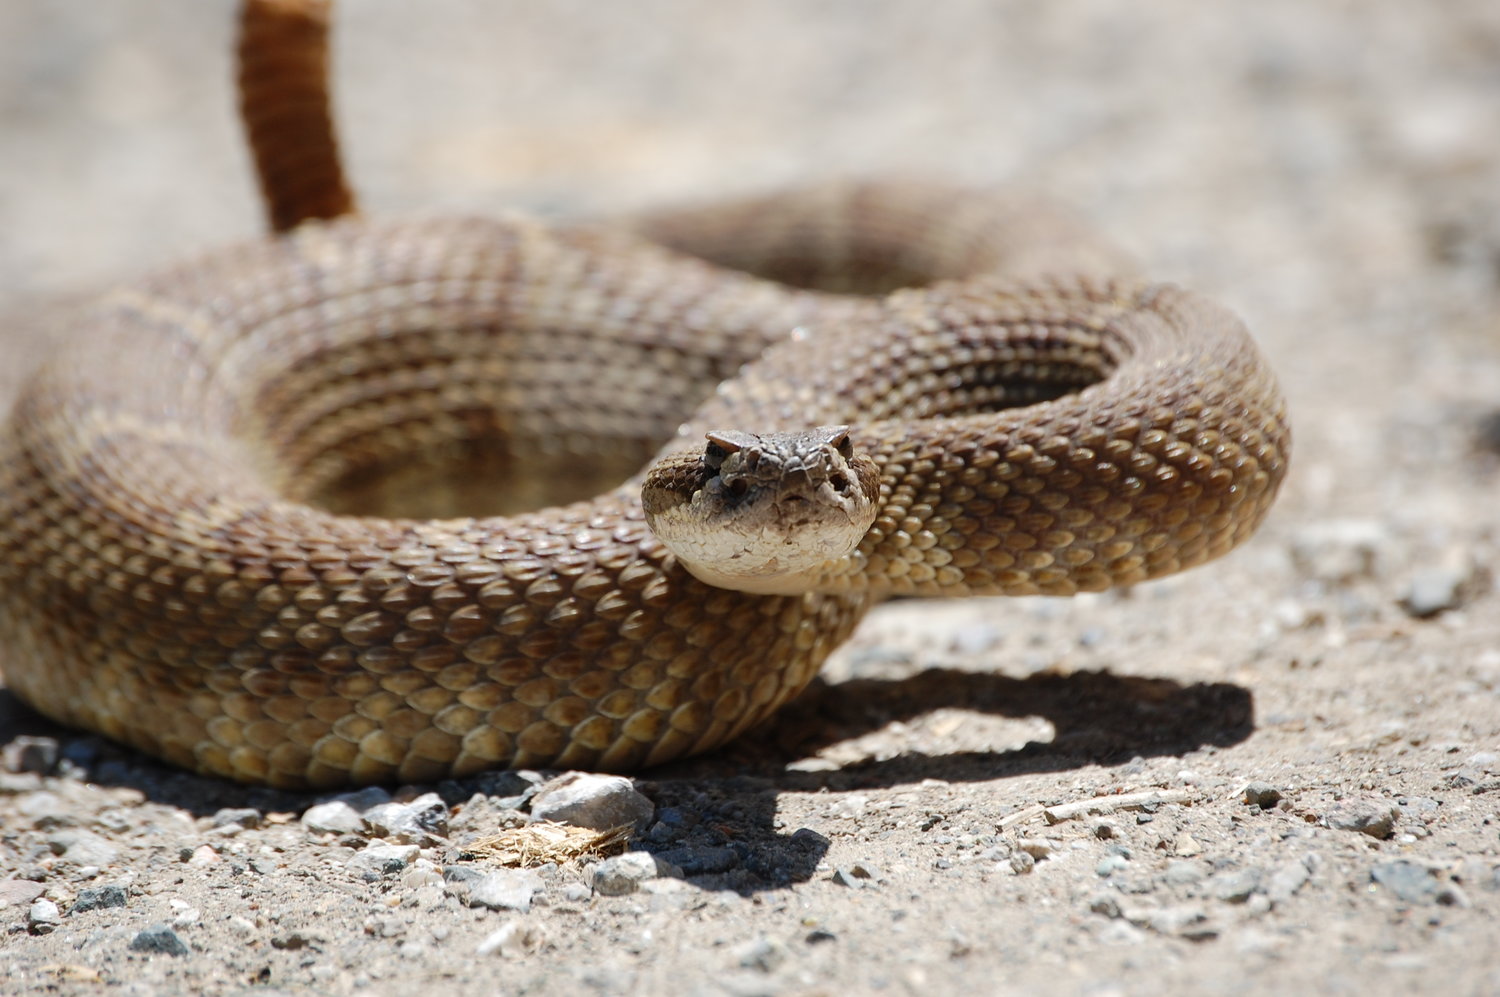 How to survive a snakebite in the wilderness — The Asclepius Snakebite Foundation